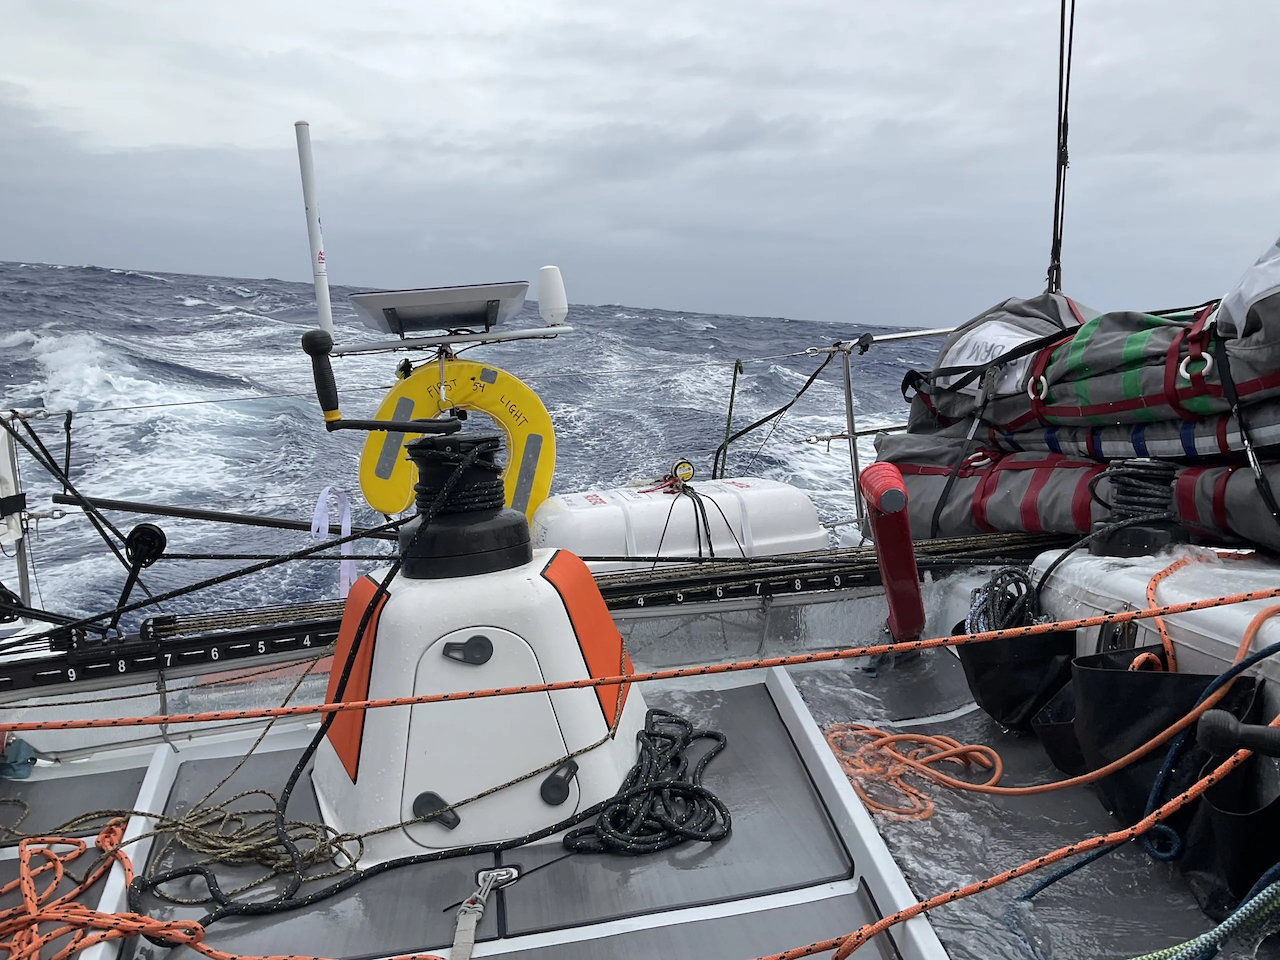 Too Short for the Southern Ocean: A Dispatch from Cole Brauer on the Global Solo Challenge